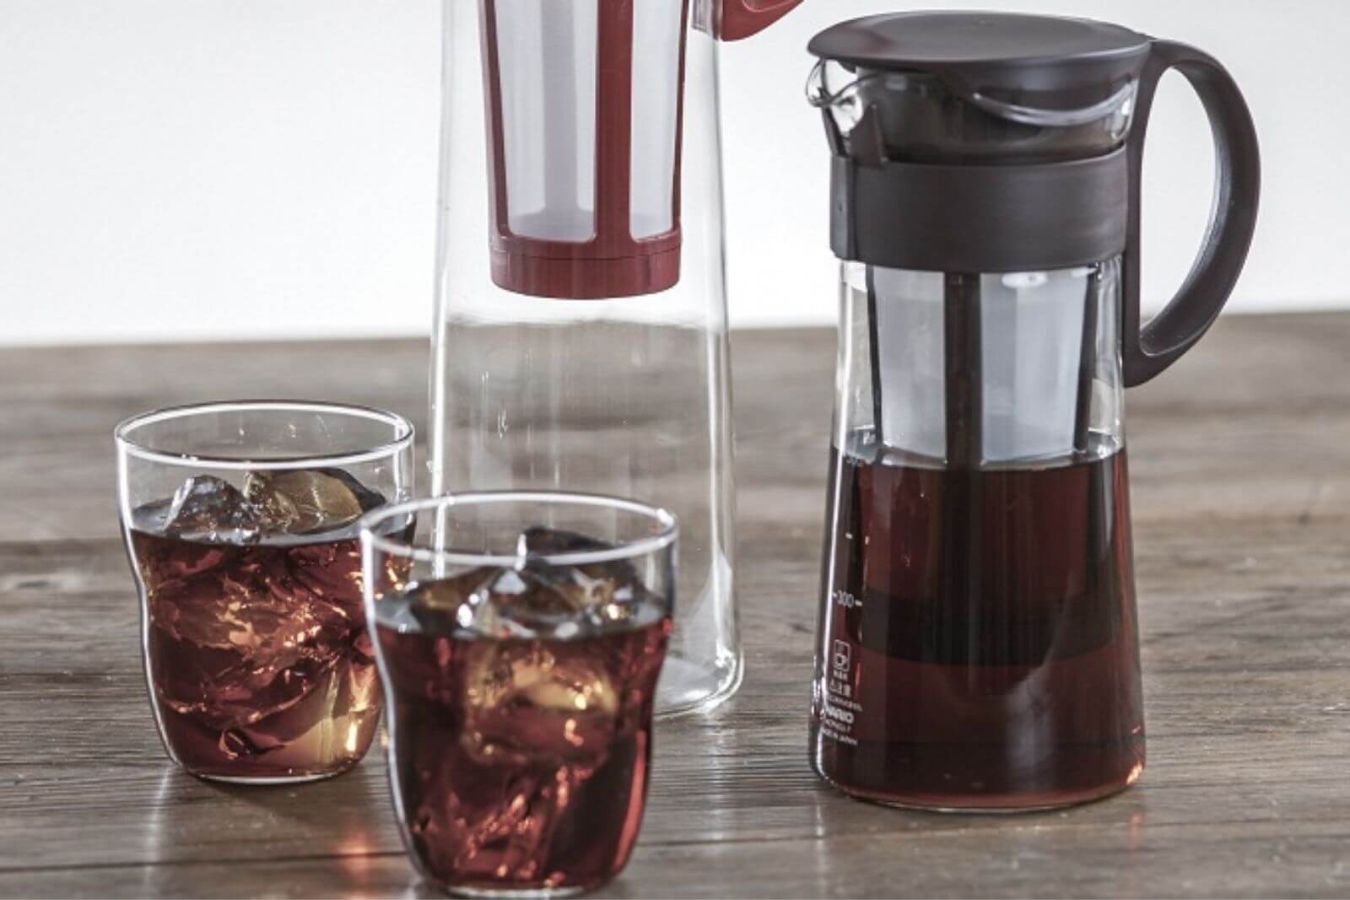 8 Ways To Make Coldbrew Coffee At Home